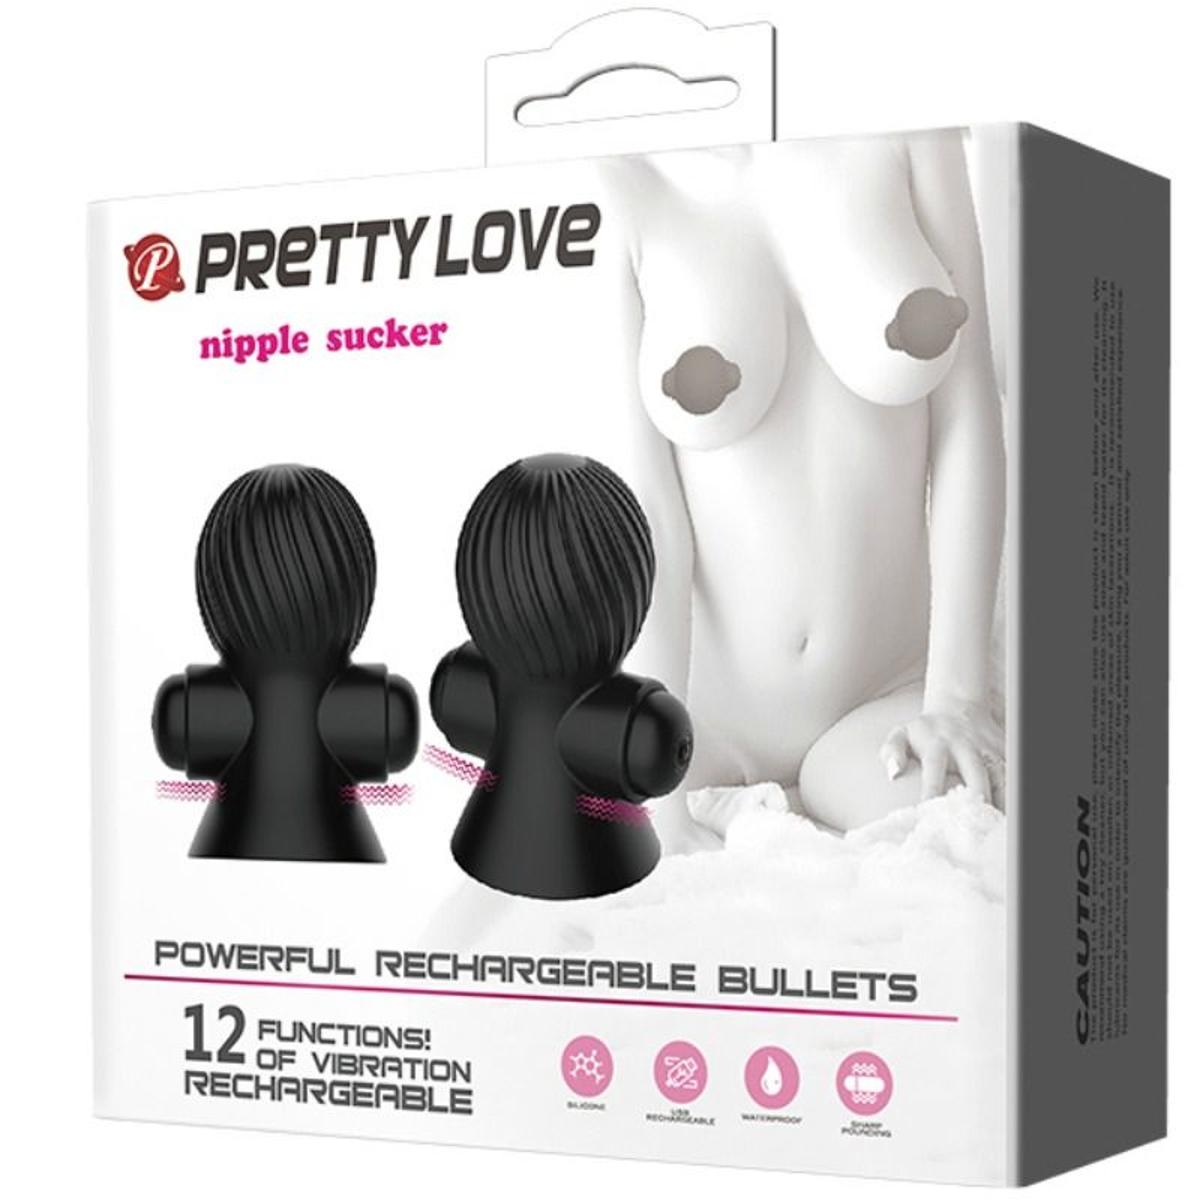 Nippelsauger "Powerful Smart Bullets" mit Vibration - OH MY! FANTASY